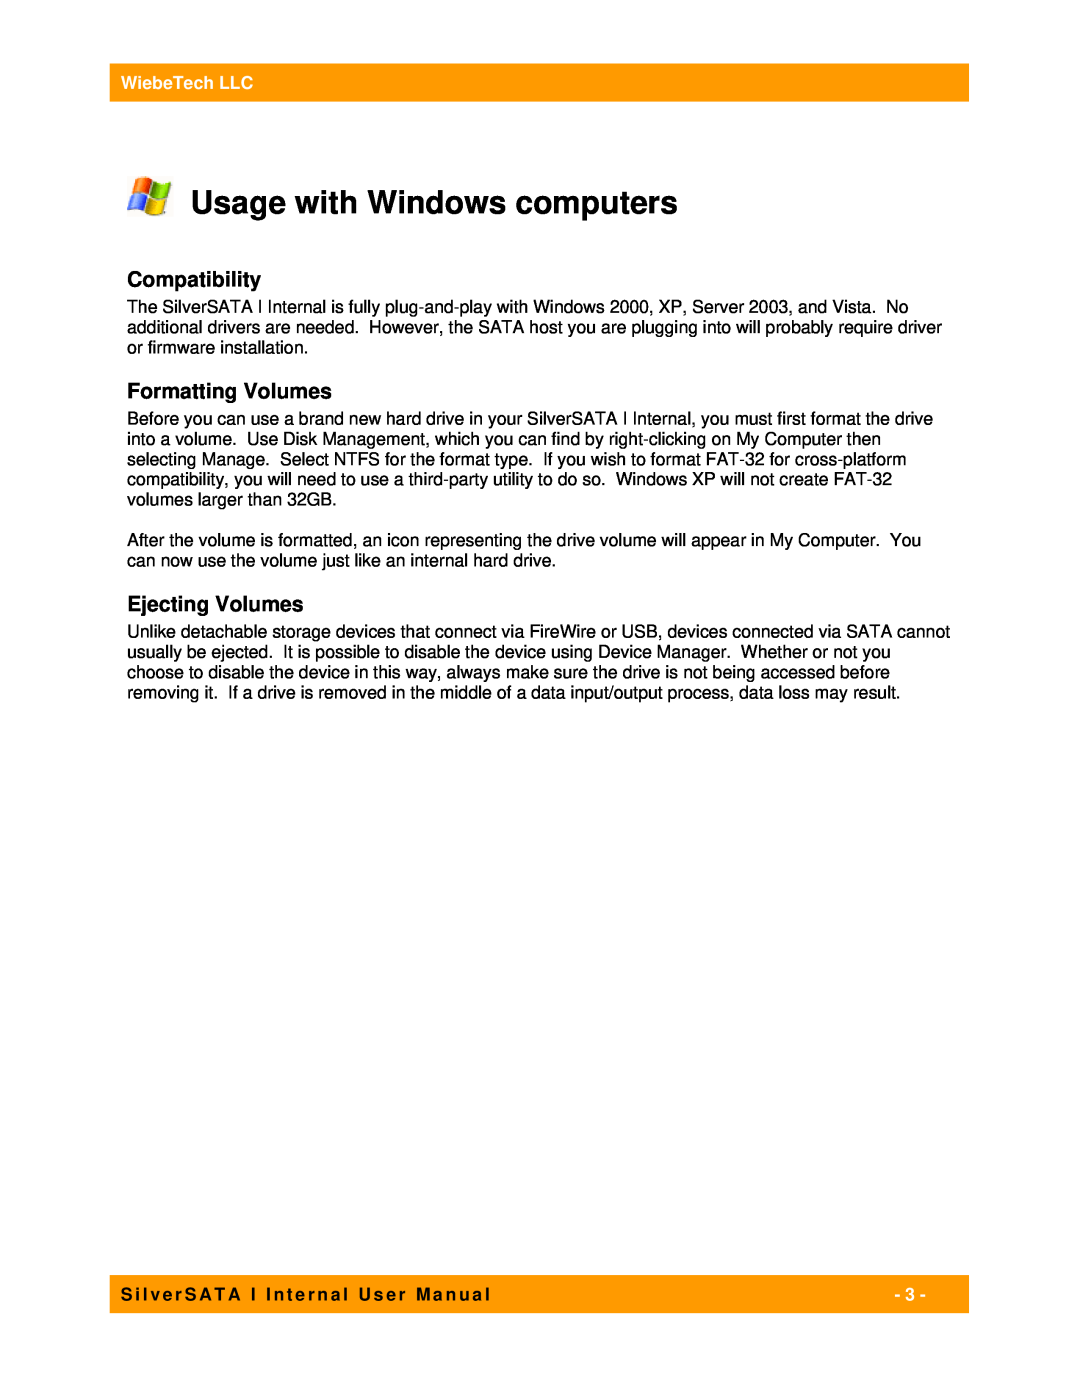 WiebeTech I user manual Usage with Windows computers, Compatibility, Formatting Volumes, Ejecting Volumes, WiebeTech LLC 